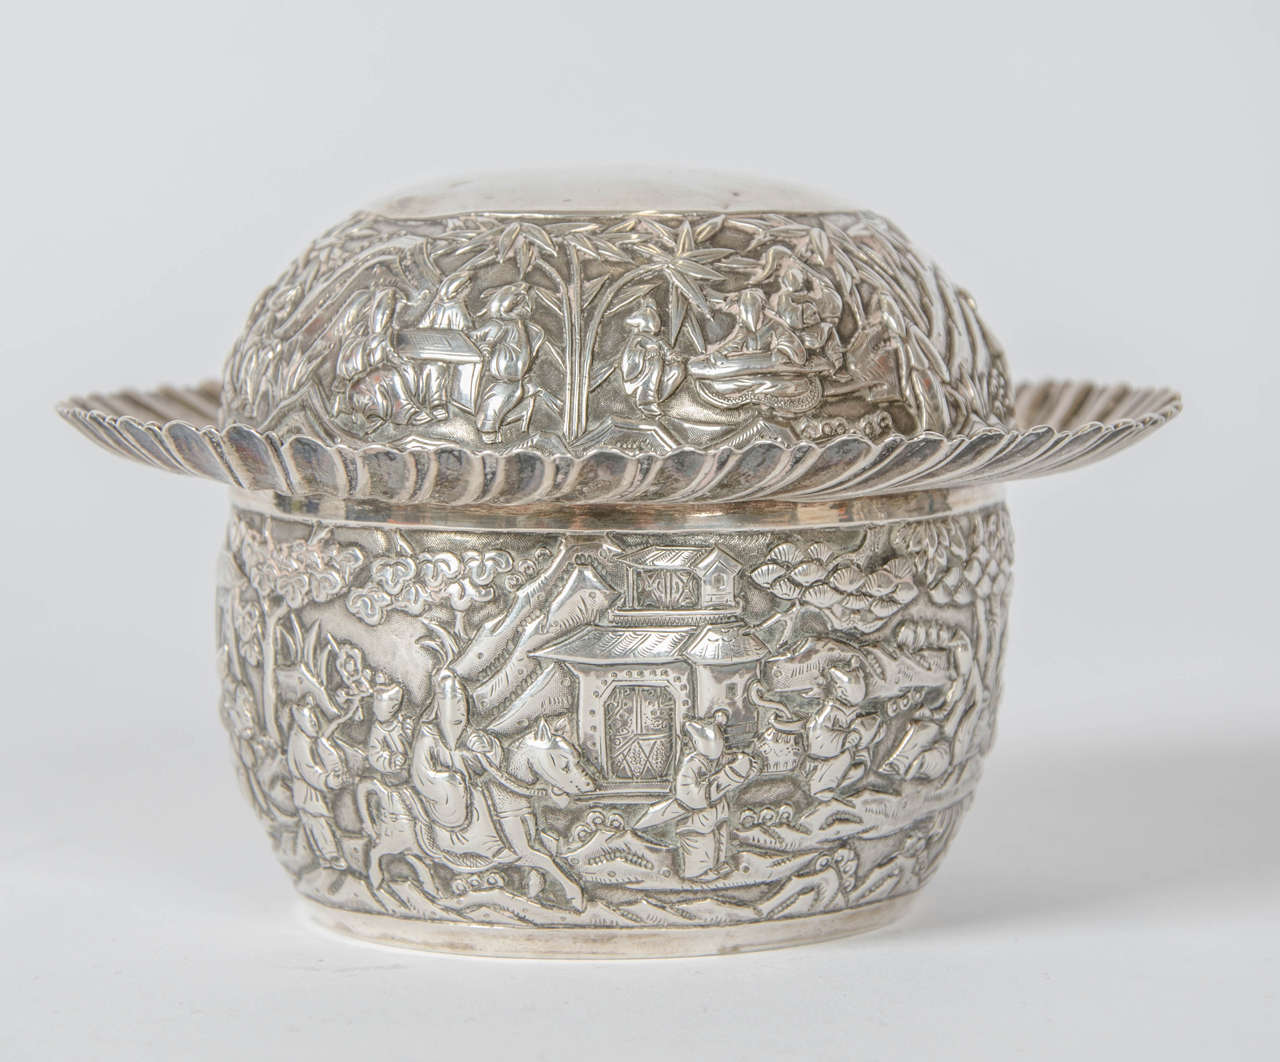 A 19th century Chinese export silver bowl and cover manufactured by Wang Hing of Canton. The bowl and cover are profusely hand chased with detailed images of Chinese scenes. Hallmark struck on the base of the bowl ( Wang Hing ) The weight of the